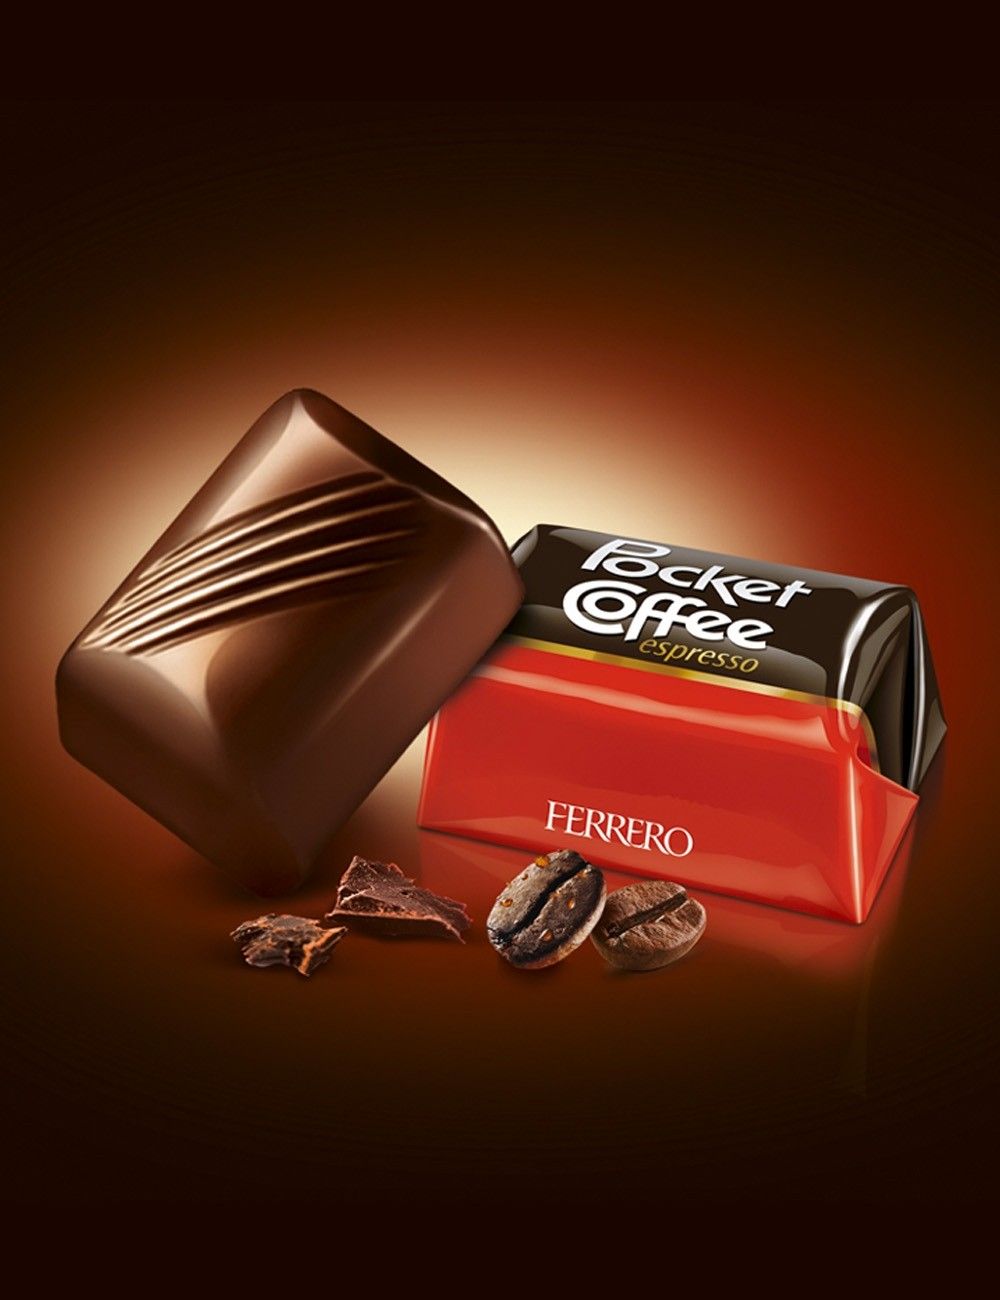 Ferrero Pocket Coffee Espresso and Chocolate. Pocket Coffee is a brand of  food products made in Italy by Ferrero Stock Photo - Alamy, pocket coffee 